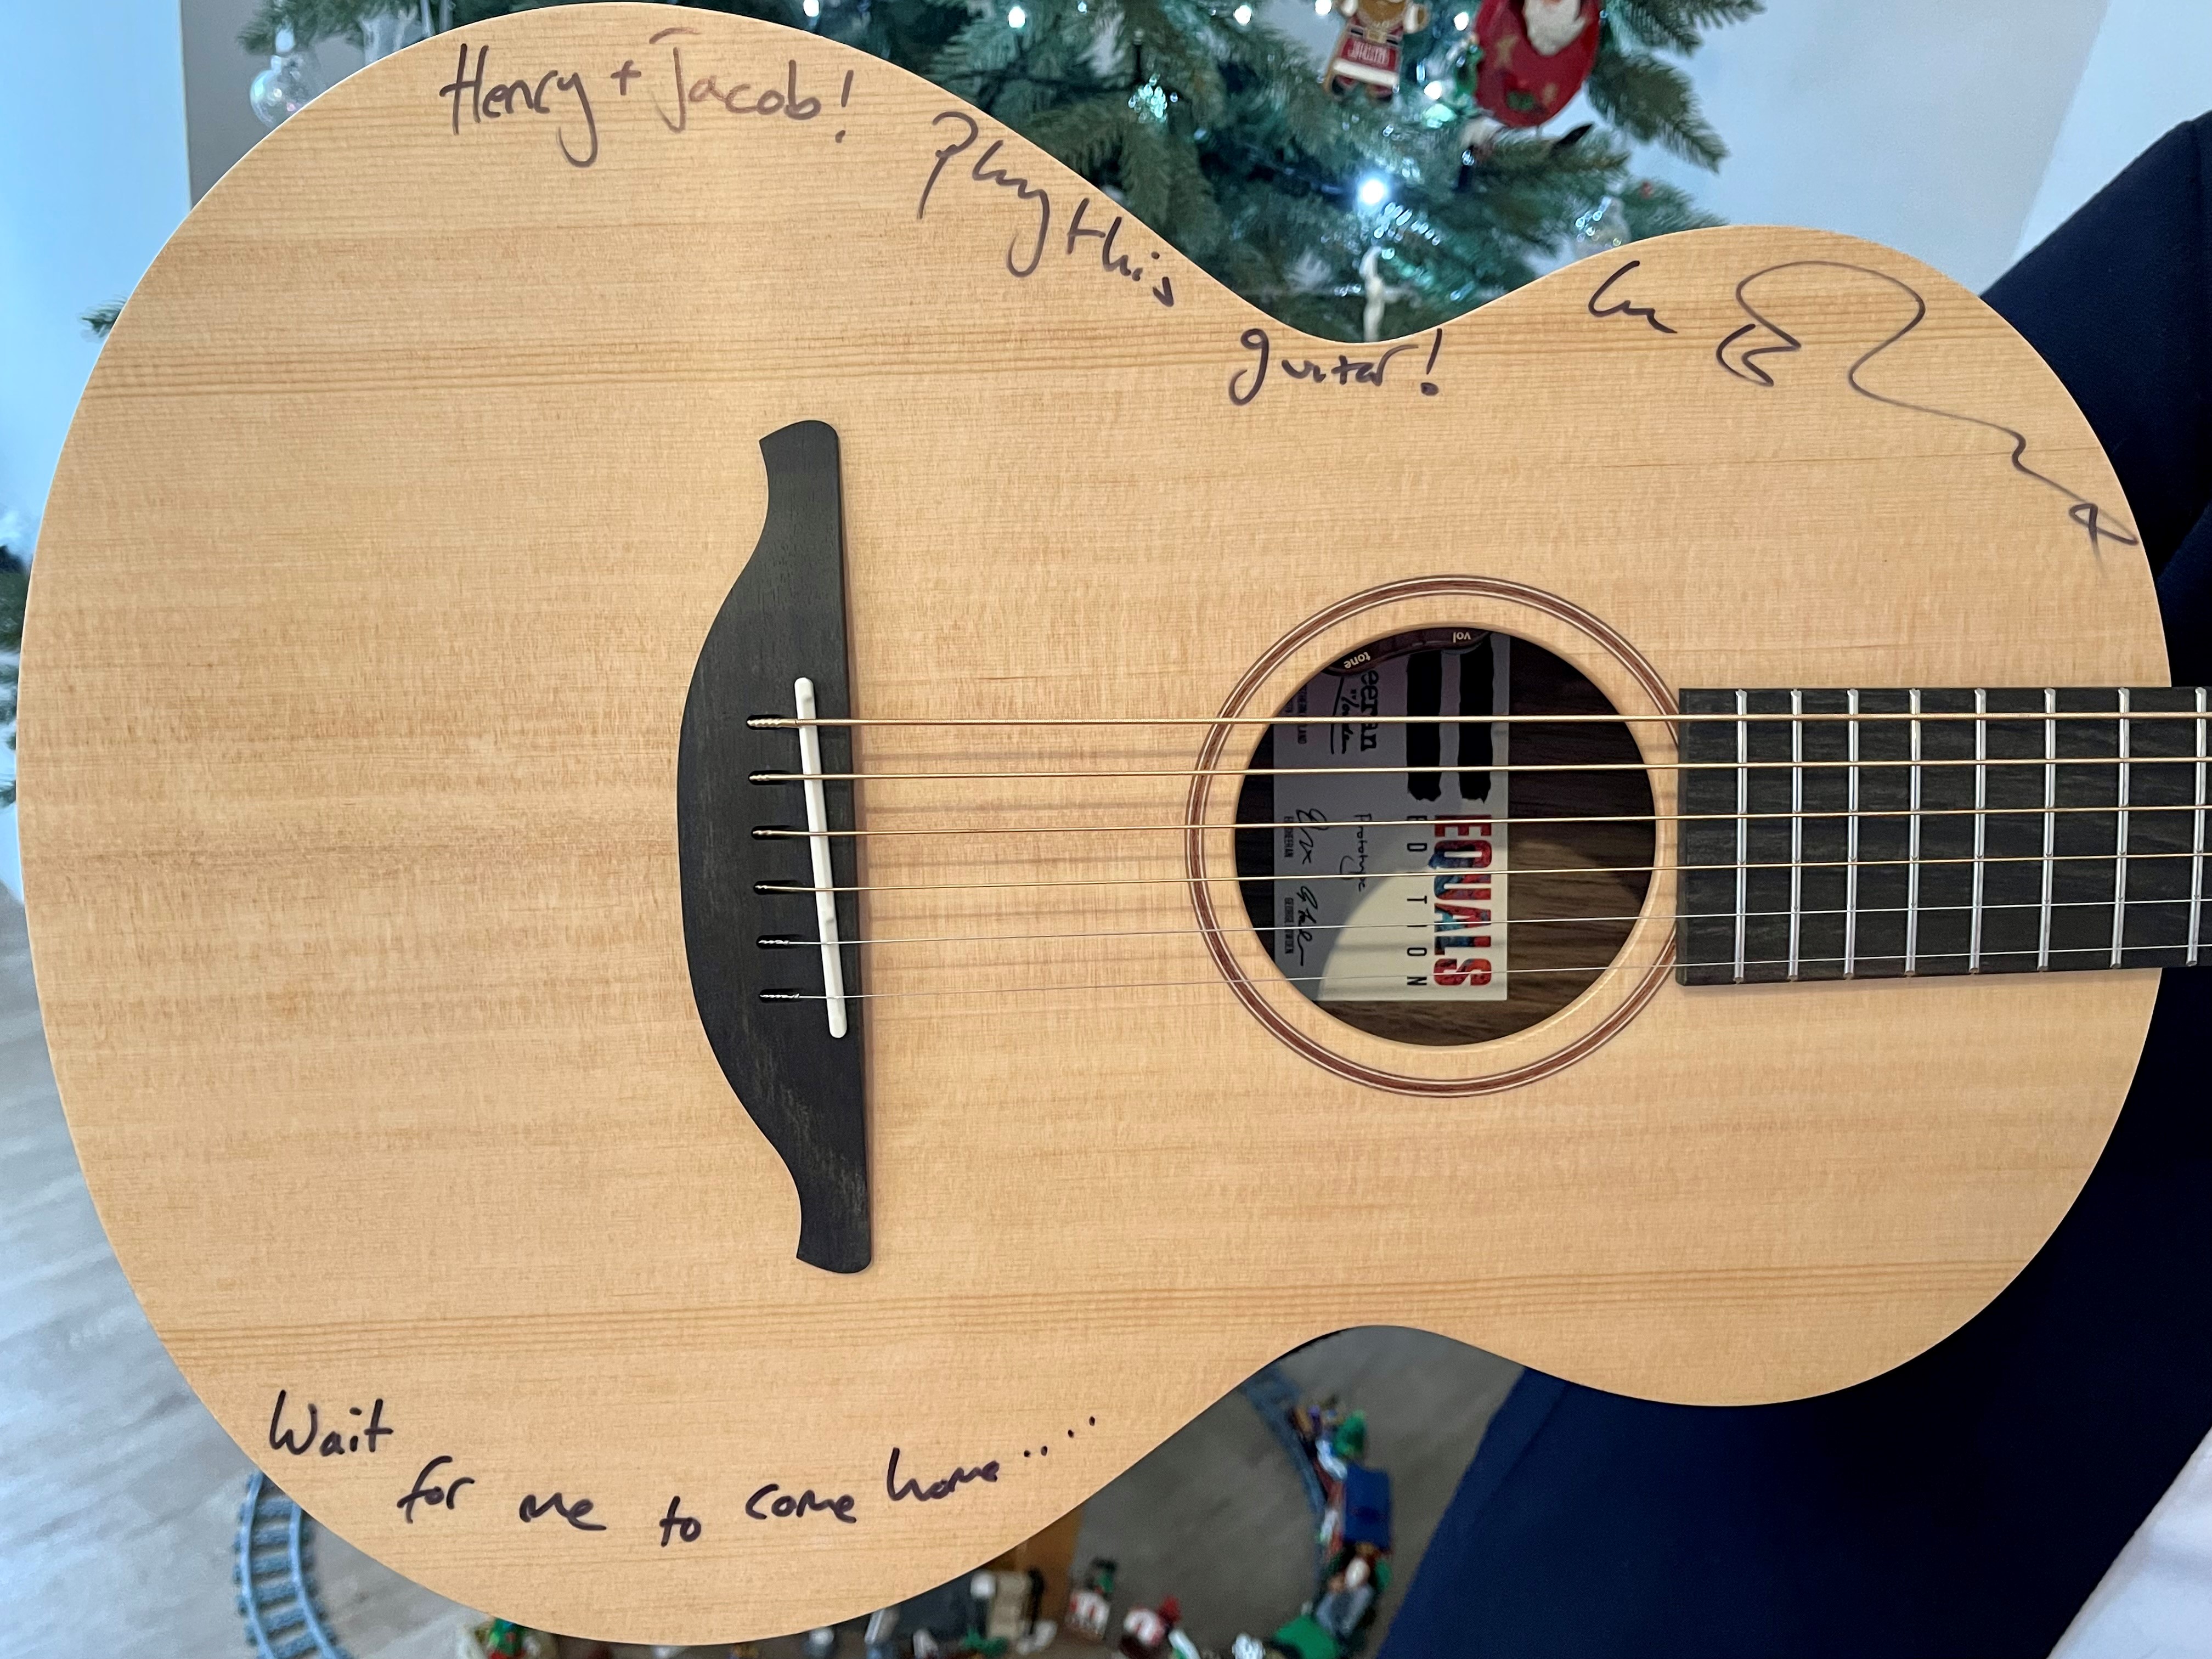 Ed Sheeran wrote ‘Henry + Jacob! Play this guitar!' on the instrument, personalising it for the charity raffle winners. (GeeWizz/ PA)